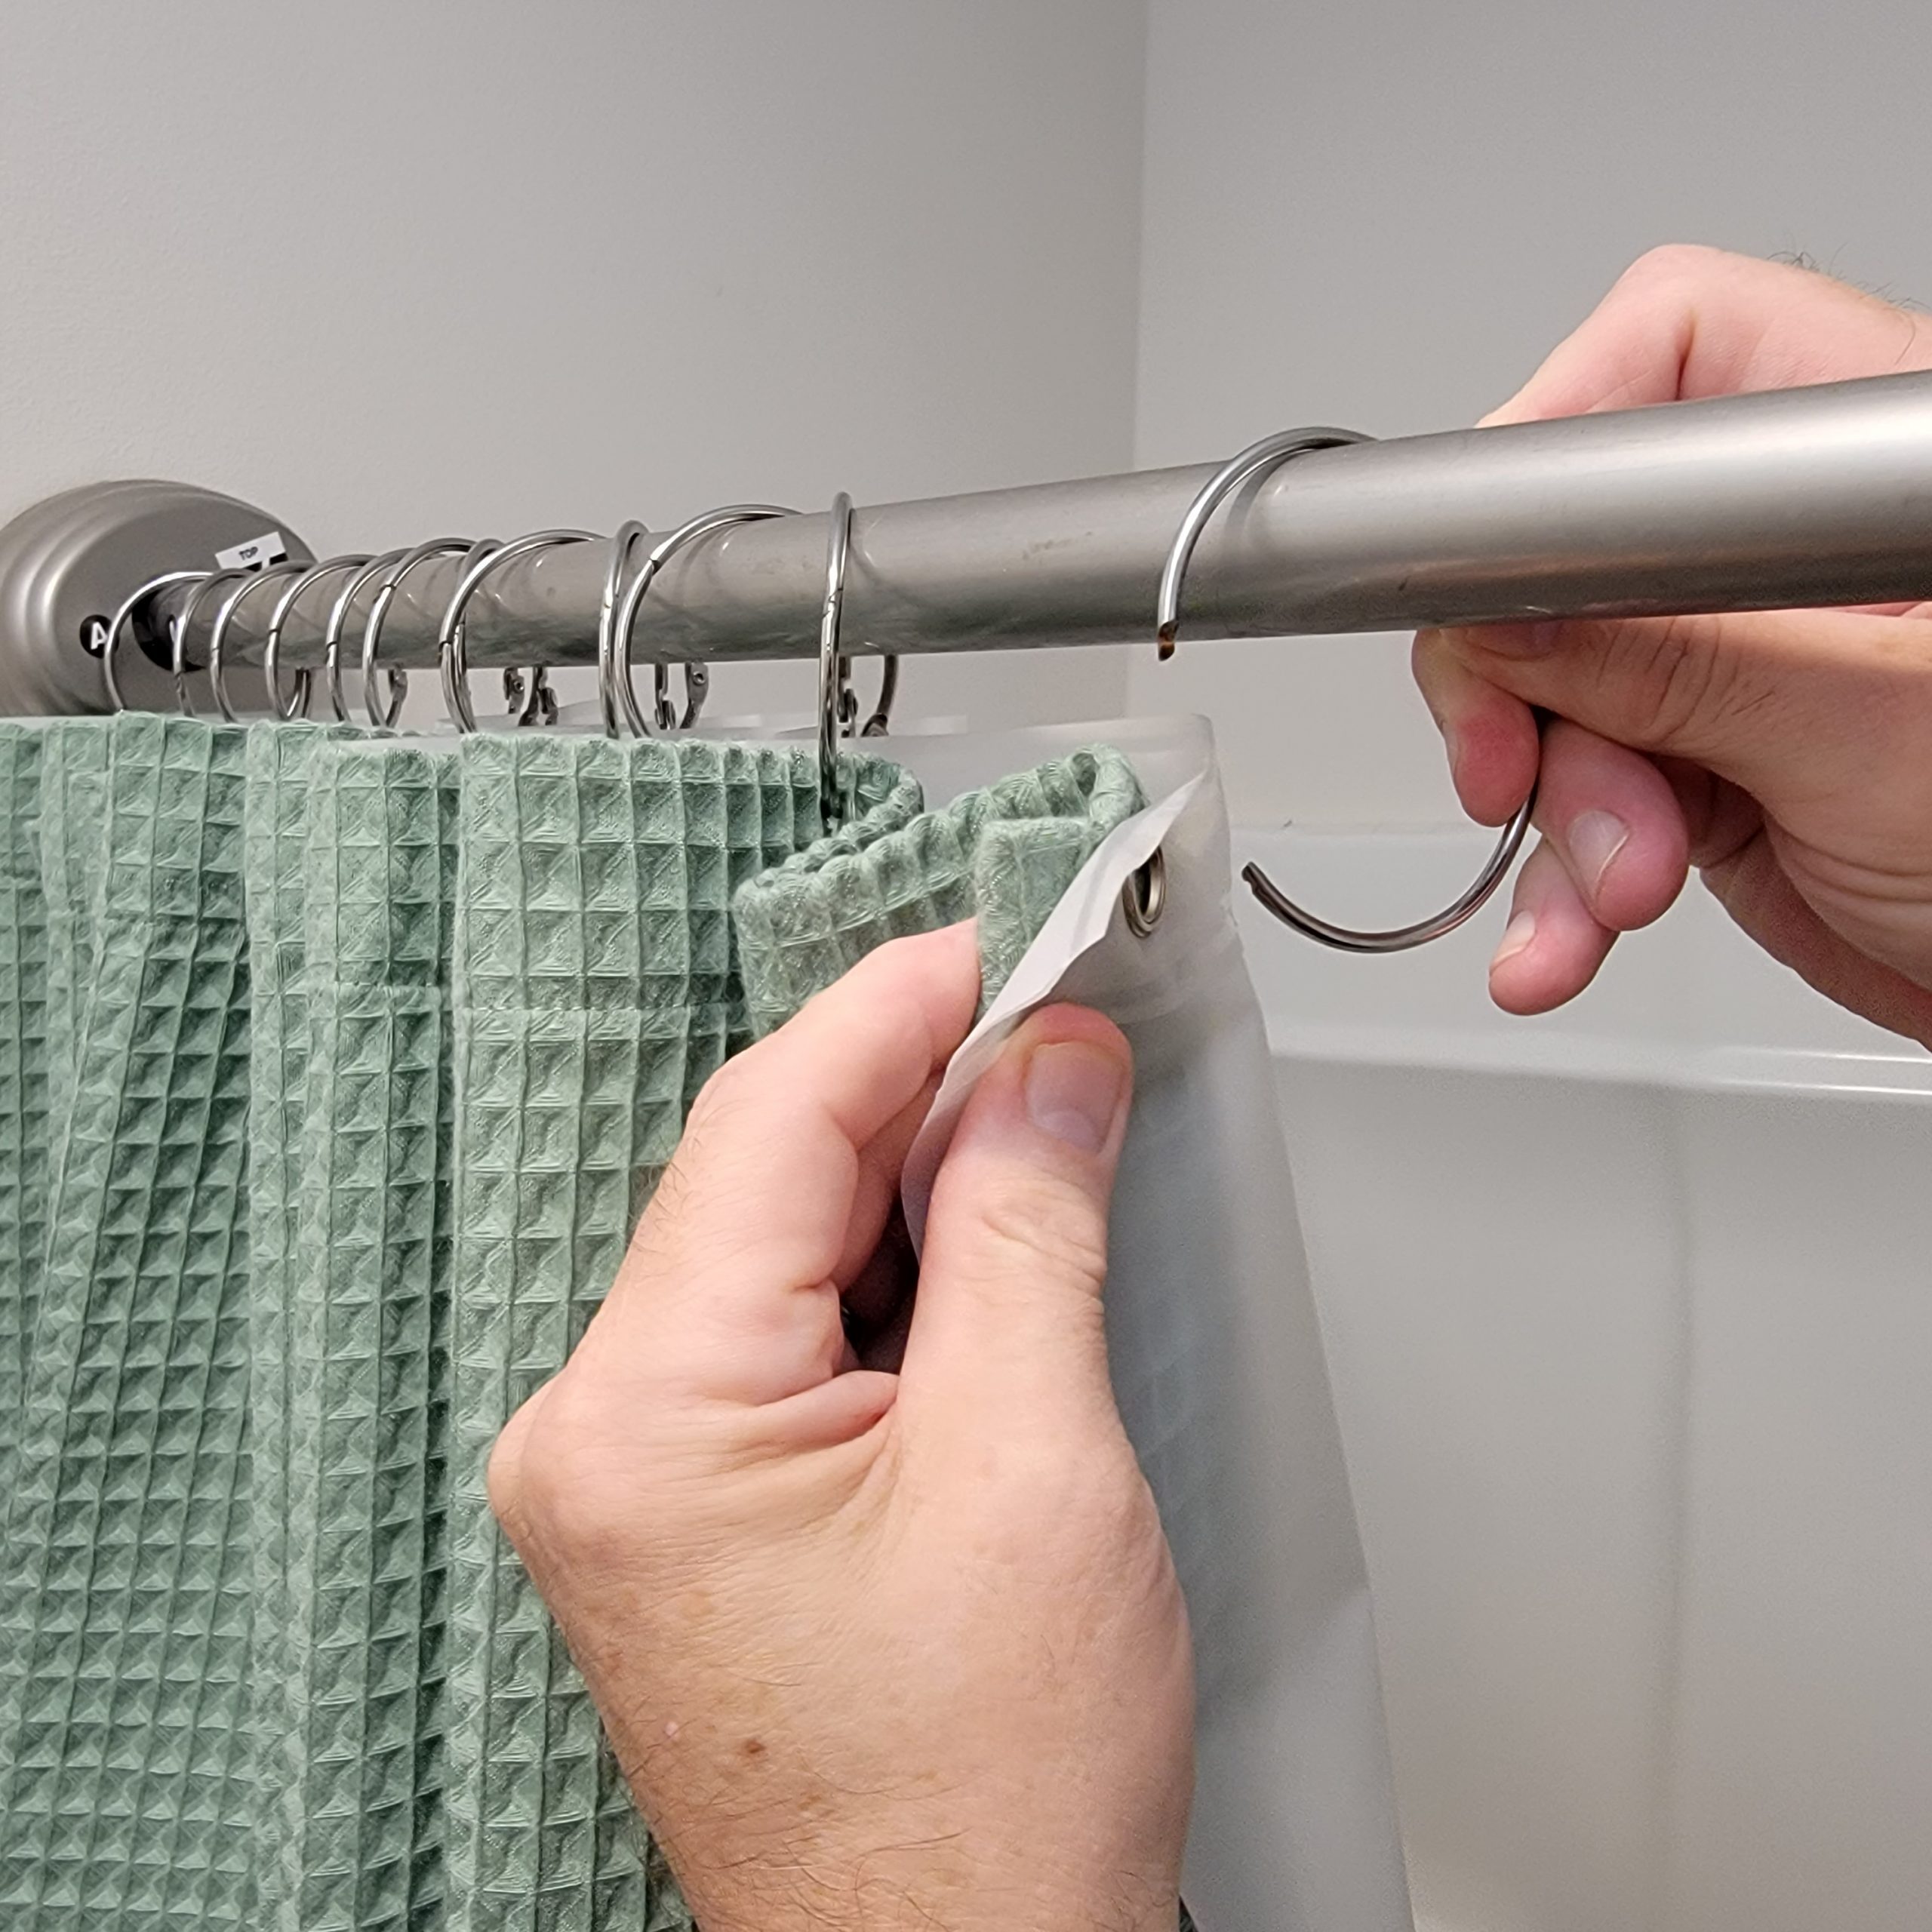 removing the shower curtain